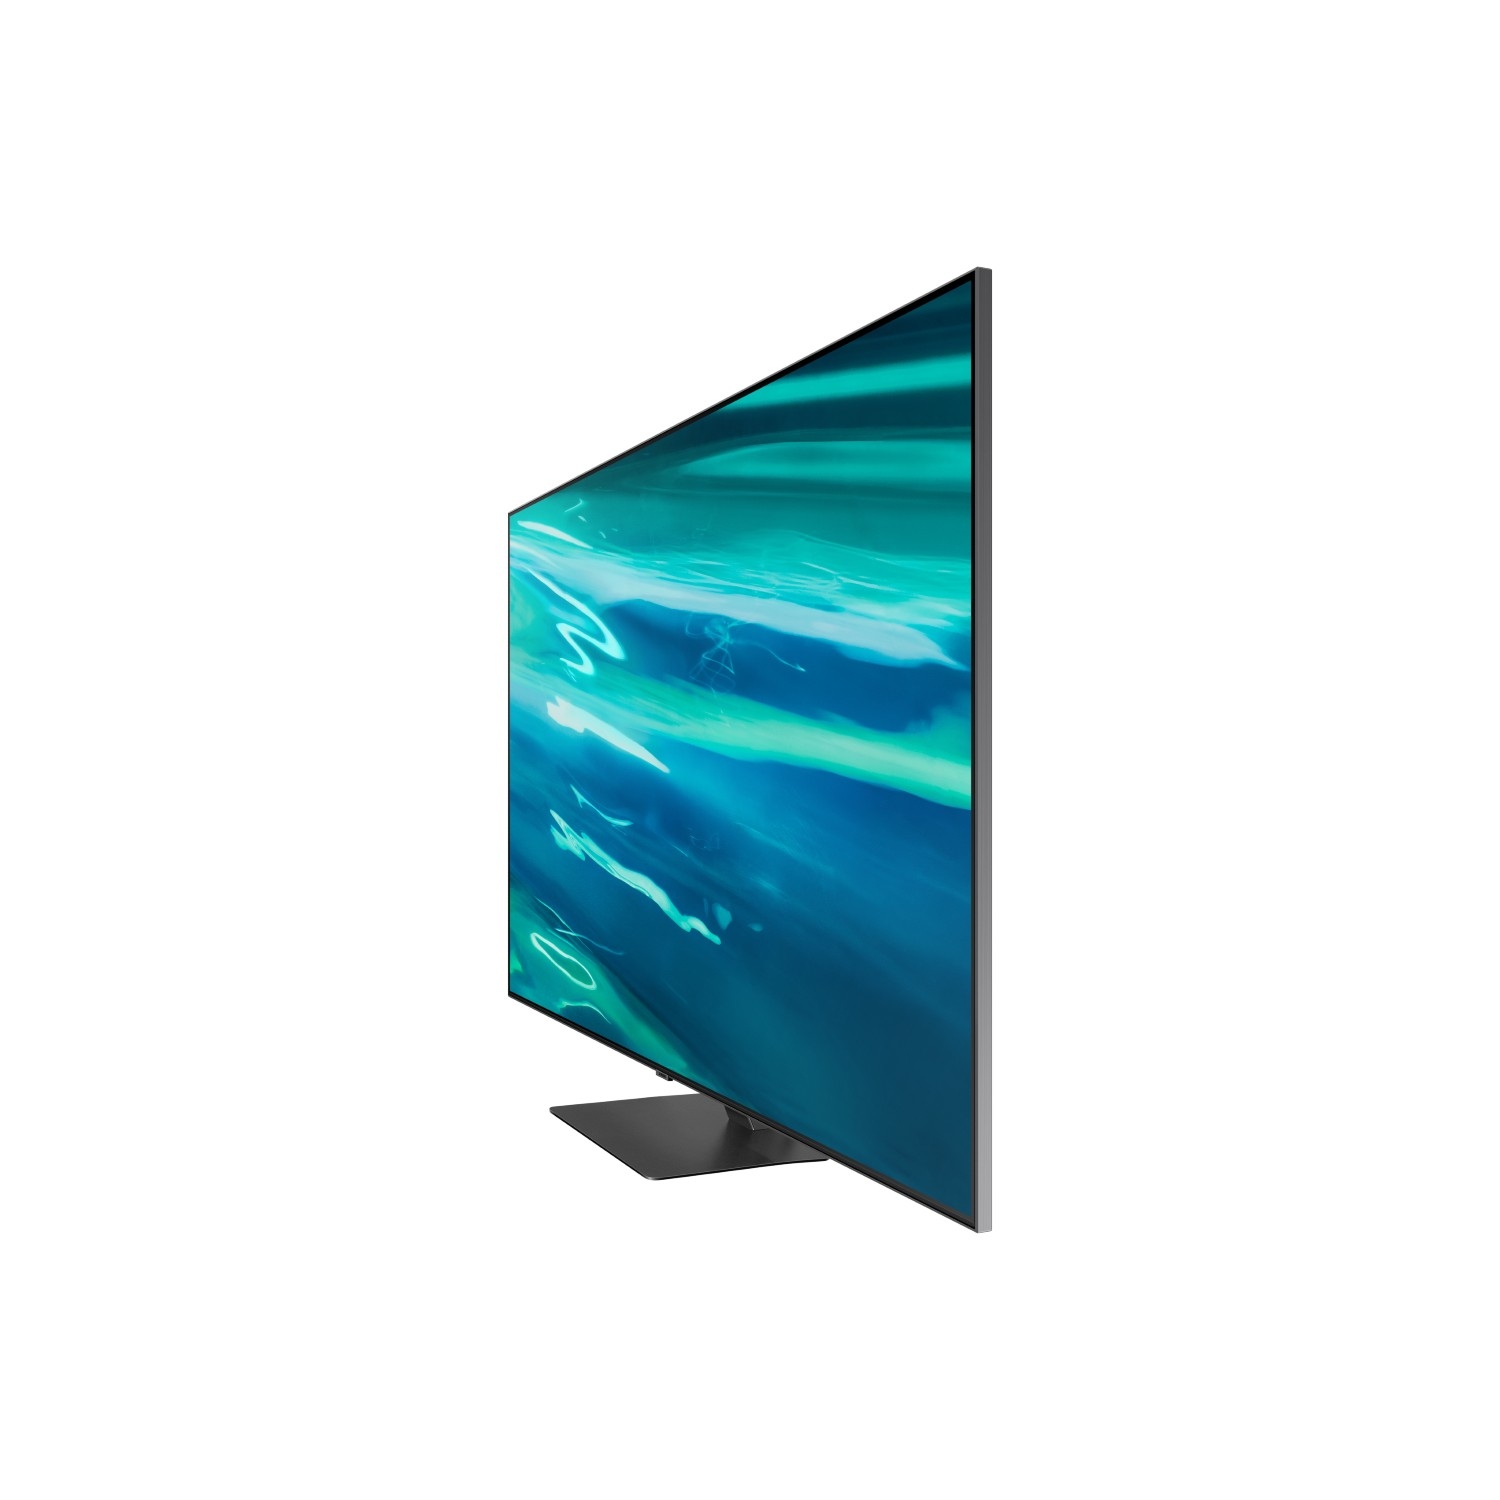 Samsung QE75Q80AATXXU 75" 4K QLED Smart TV Quantum HDR 1500 powered by HDR10+ with Object Tracking Sound and Direct Full Array - 3